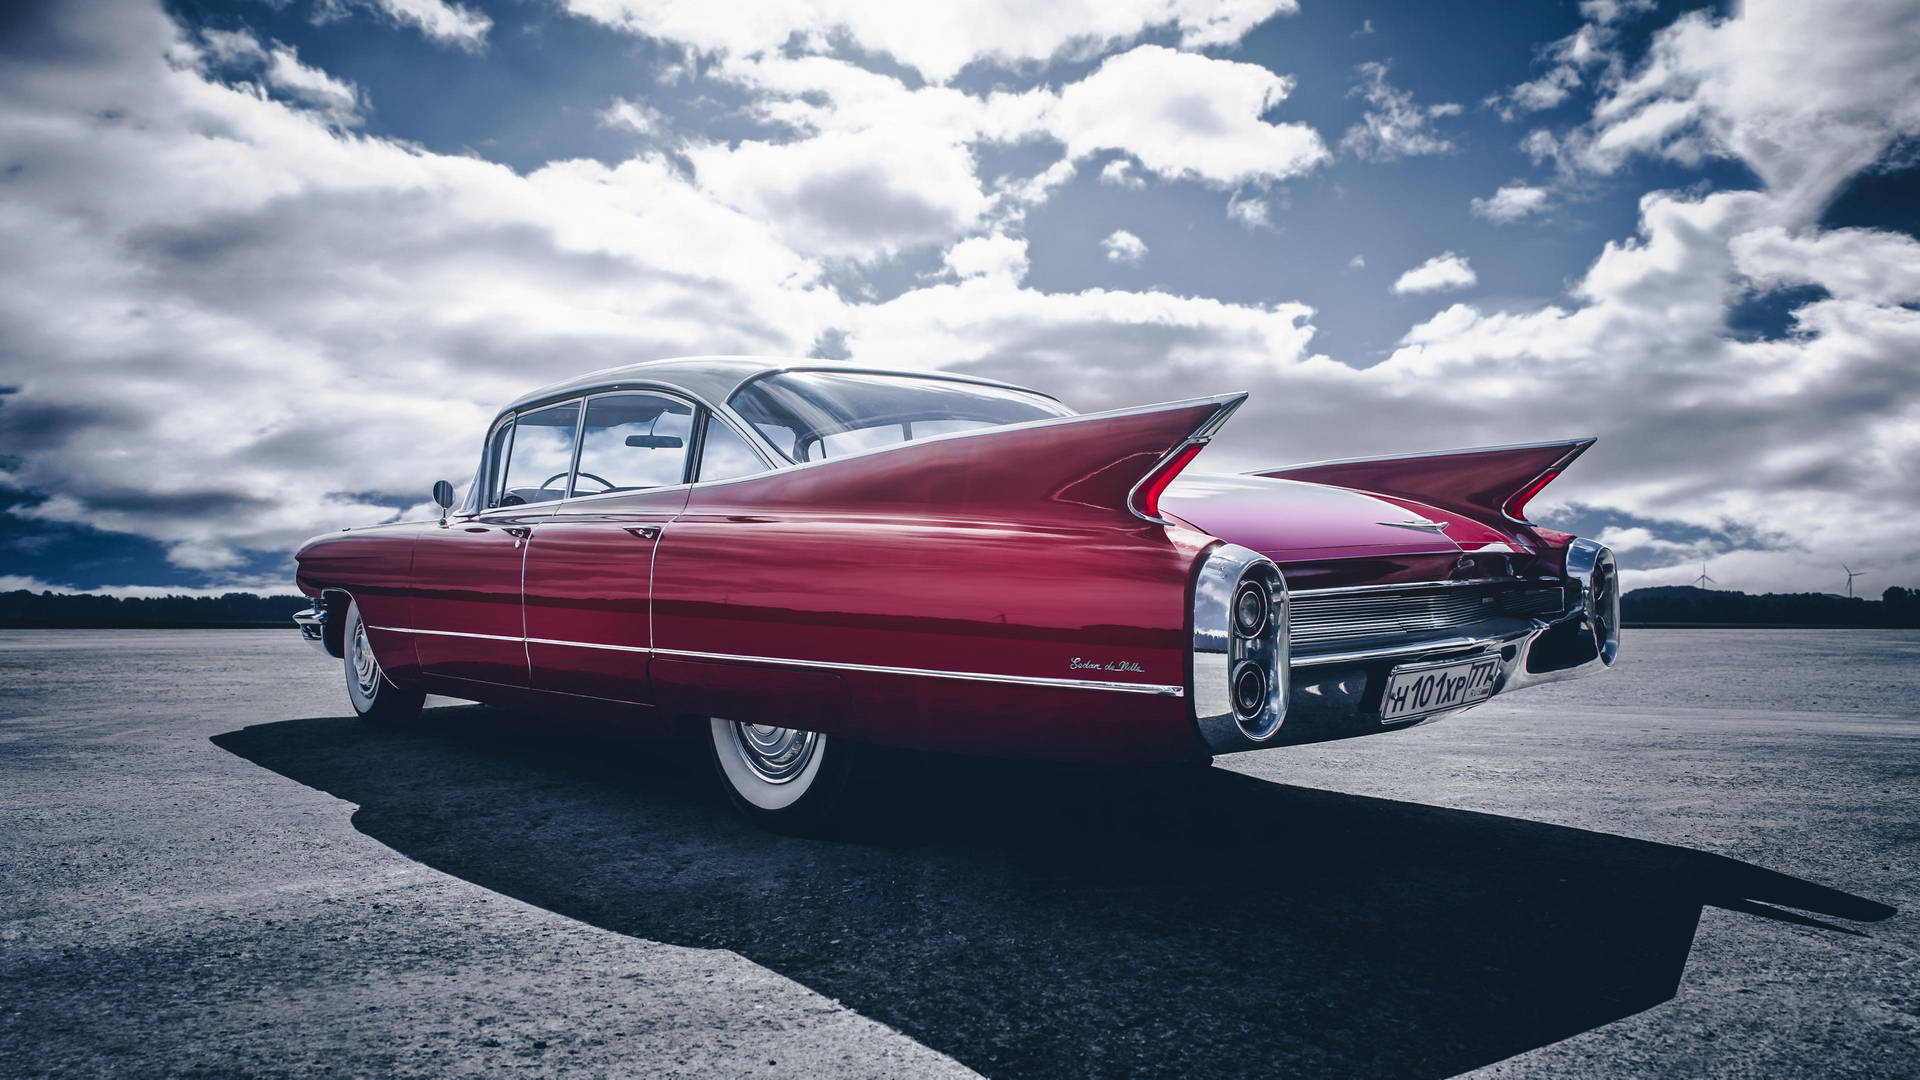 Red Cadillac DeVille Rear View Wallpaper